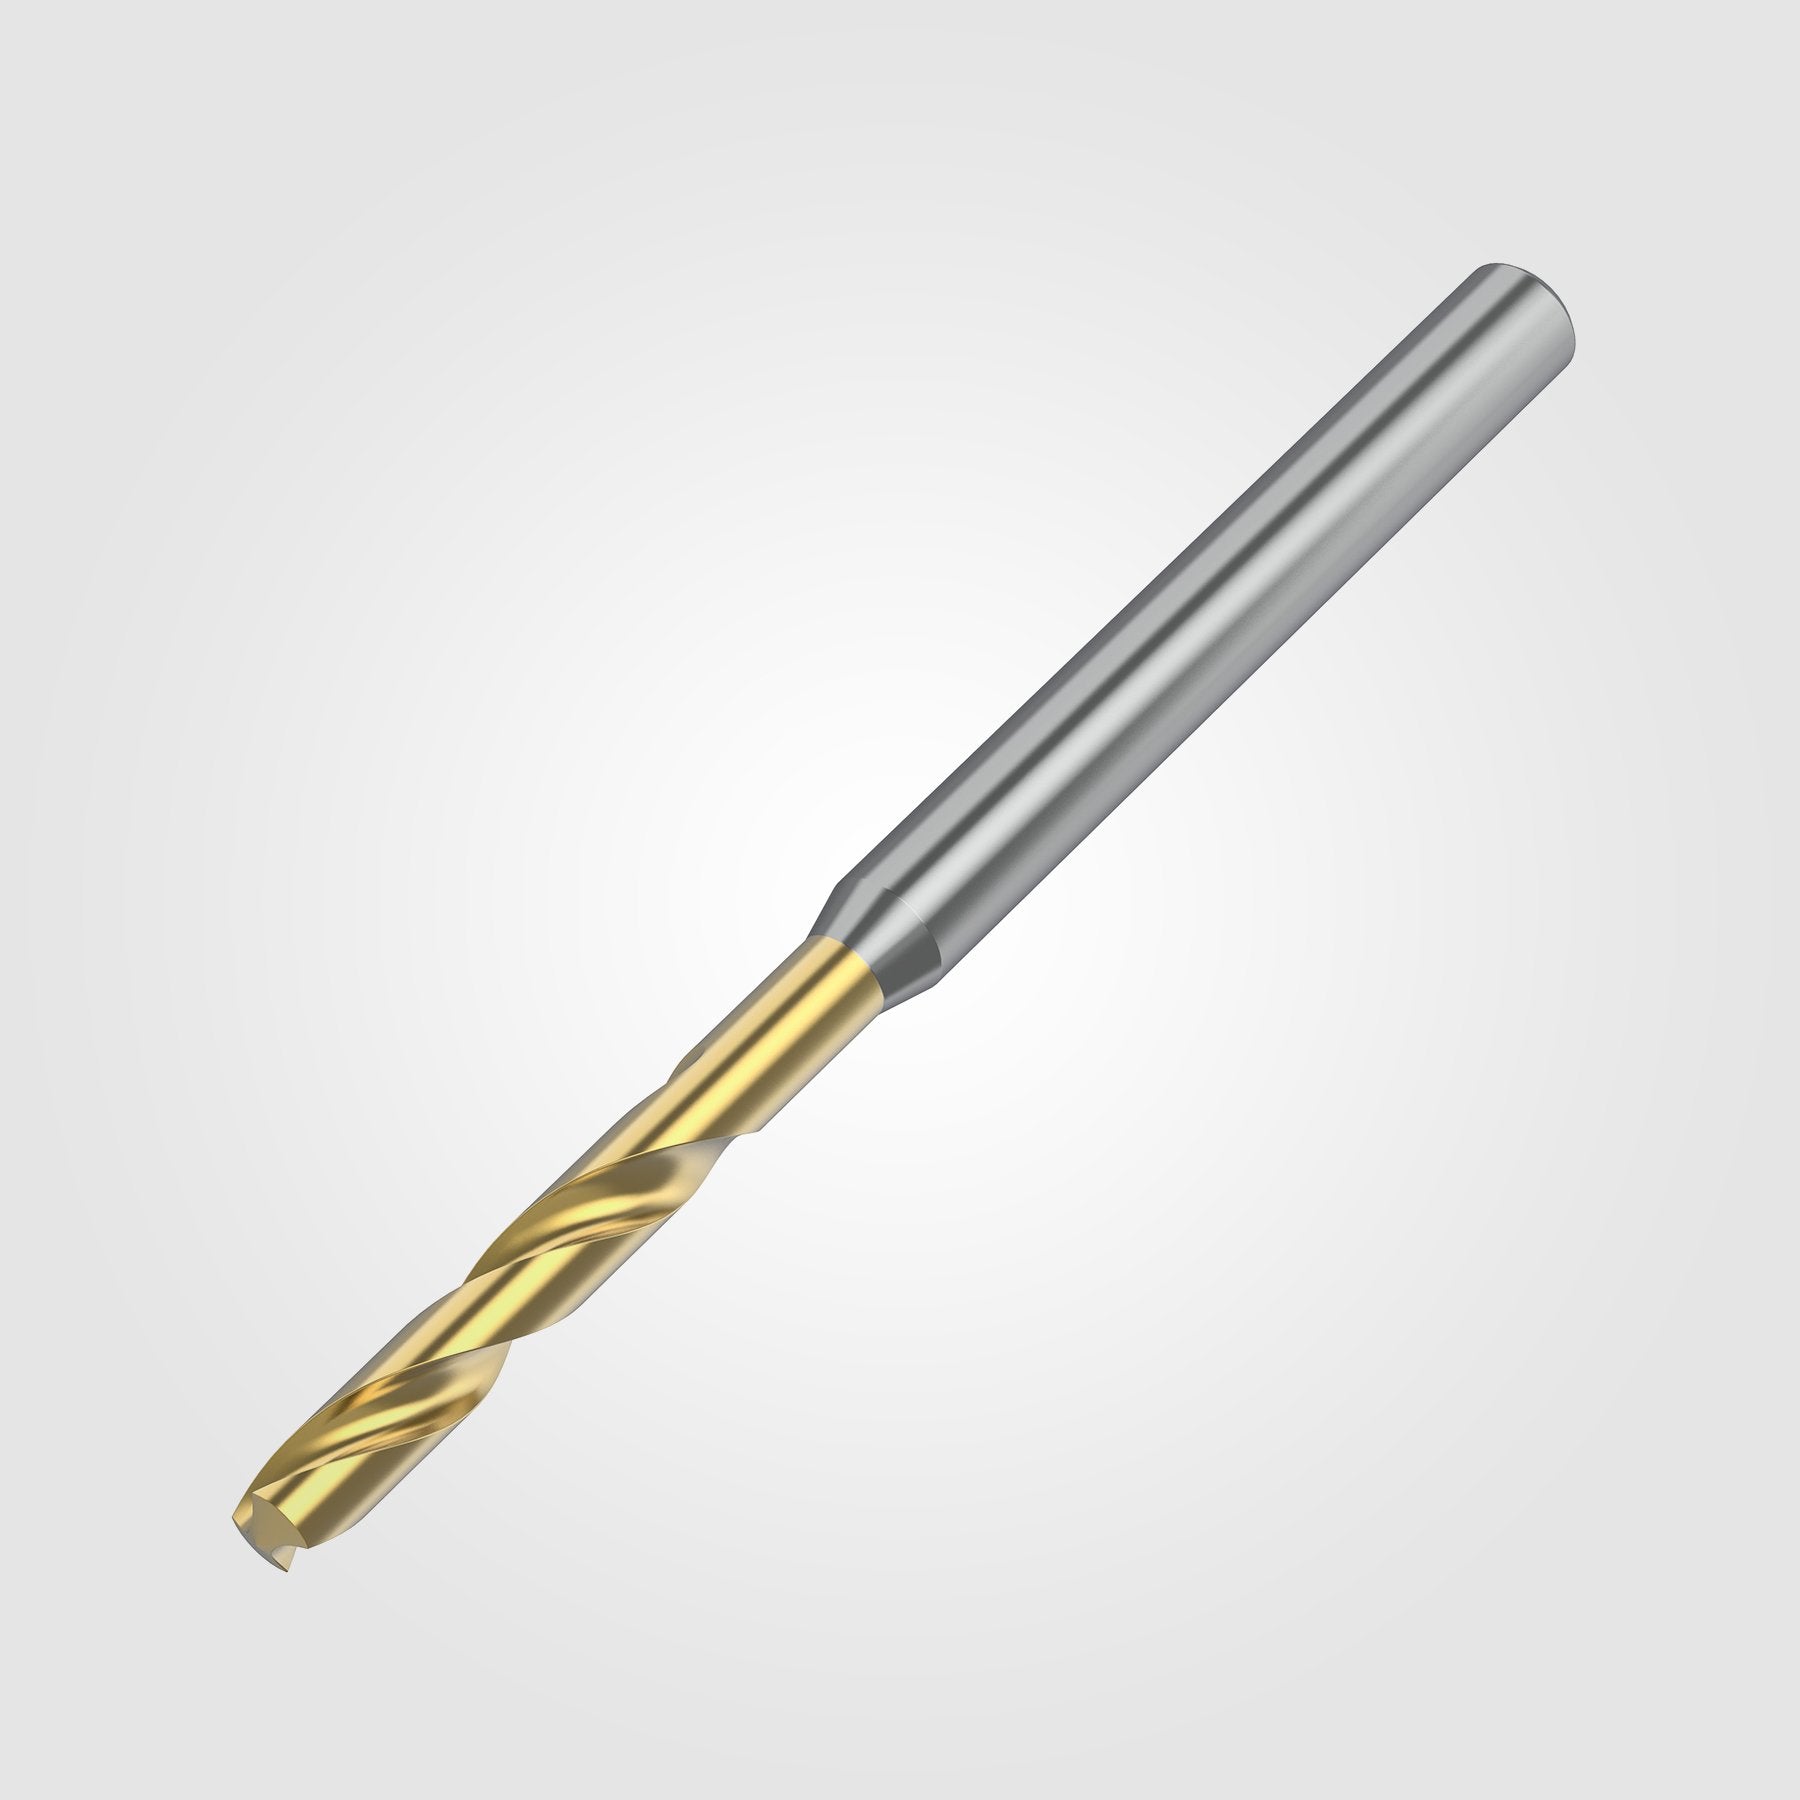 GOdrill (THROUGH COOLANT) | 3.8mm / .1496" / 3xD | SOLID CARBIDE DRILL | 4151115